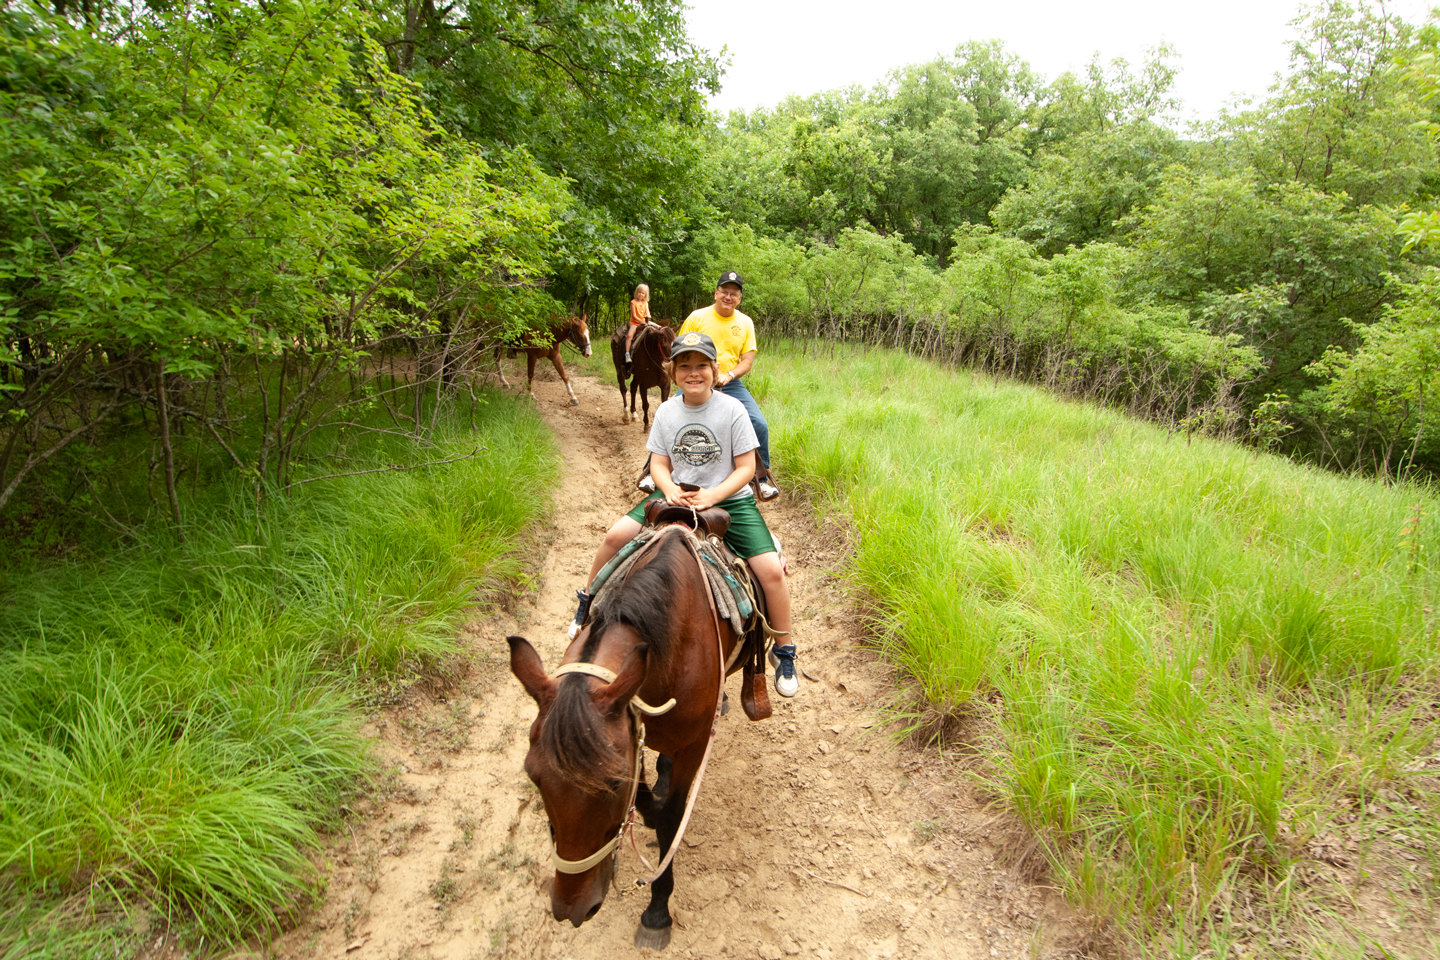 Indian Cave ends trail rides, makes way for shooting range